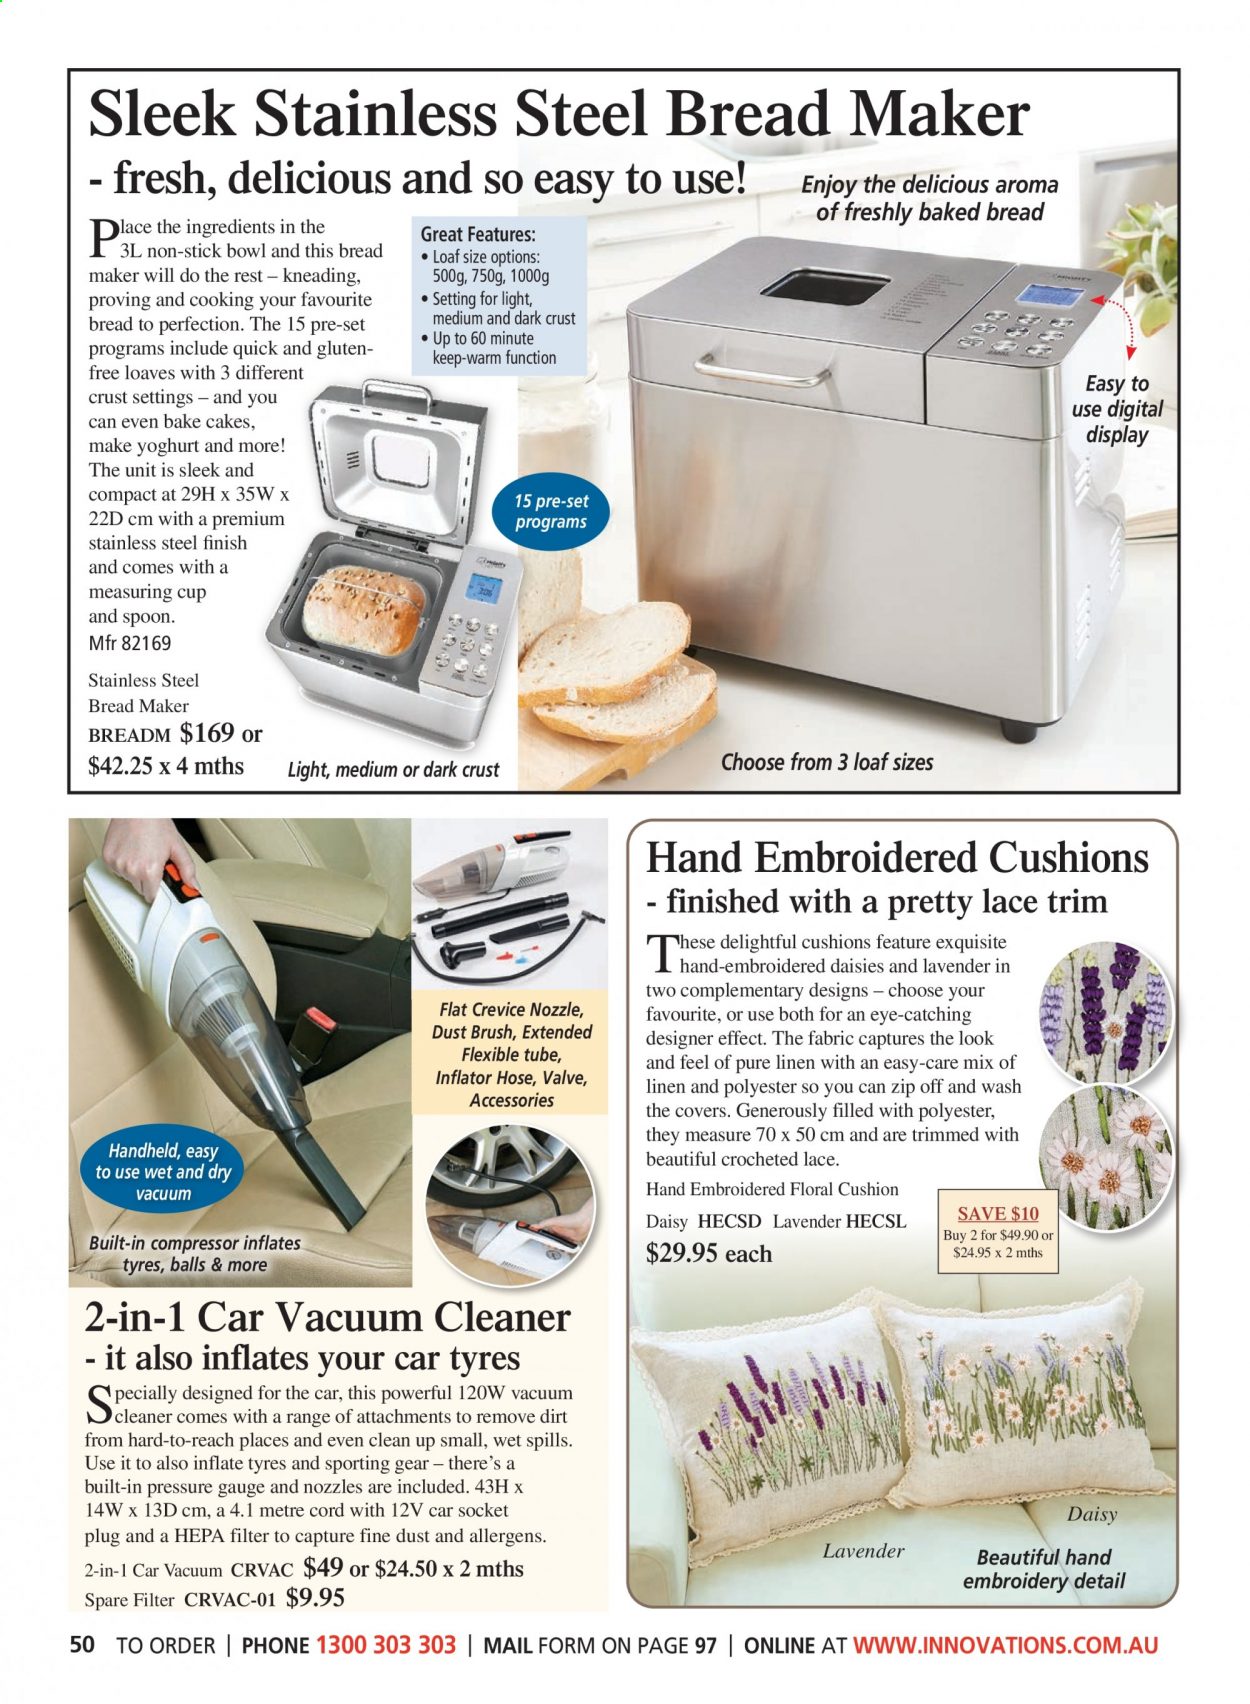 thumbnail - Innovations Catalogue - Sales products - spoon, bowl, measuring cup, cushion, linens, vacuum cleaner. Page 50.